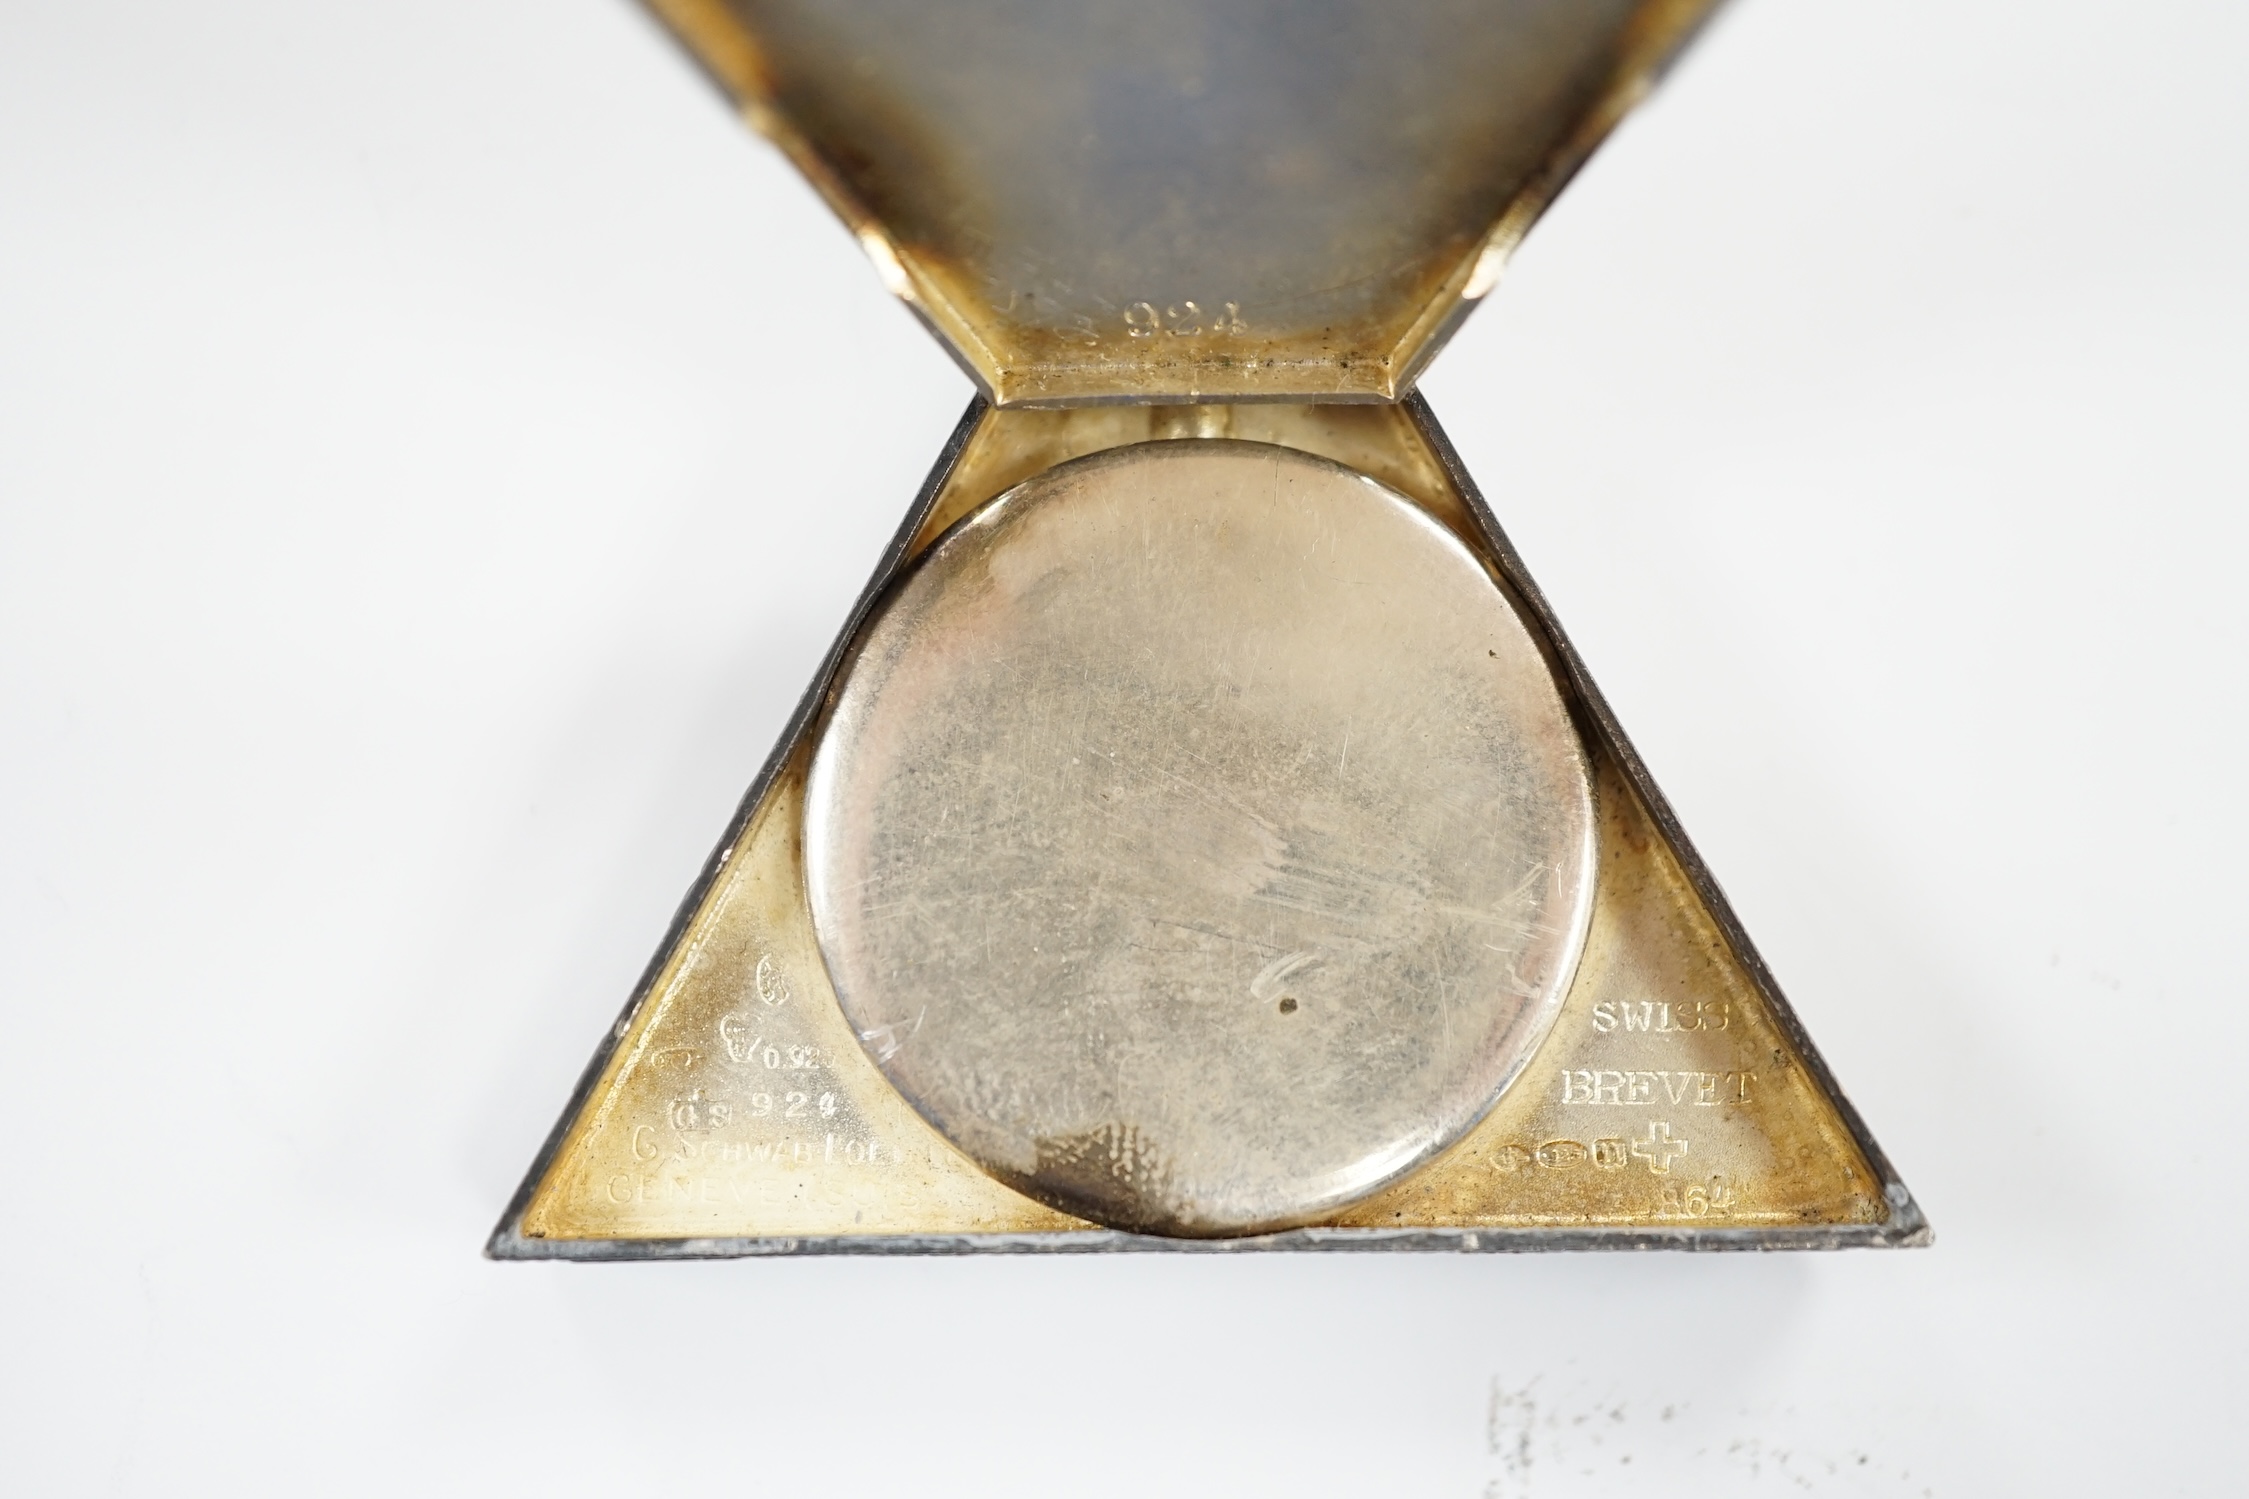 A 1920's Swiss silver triangular Masonic timepiece, with mother of pearl dial, import marks for George Stockwell, London, 1928, 0verall 65mm (lacking minute hand).